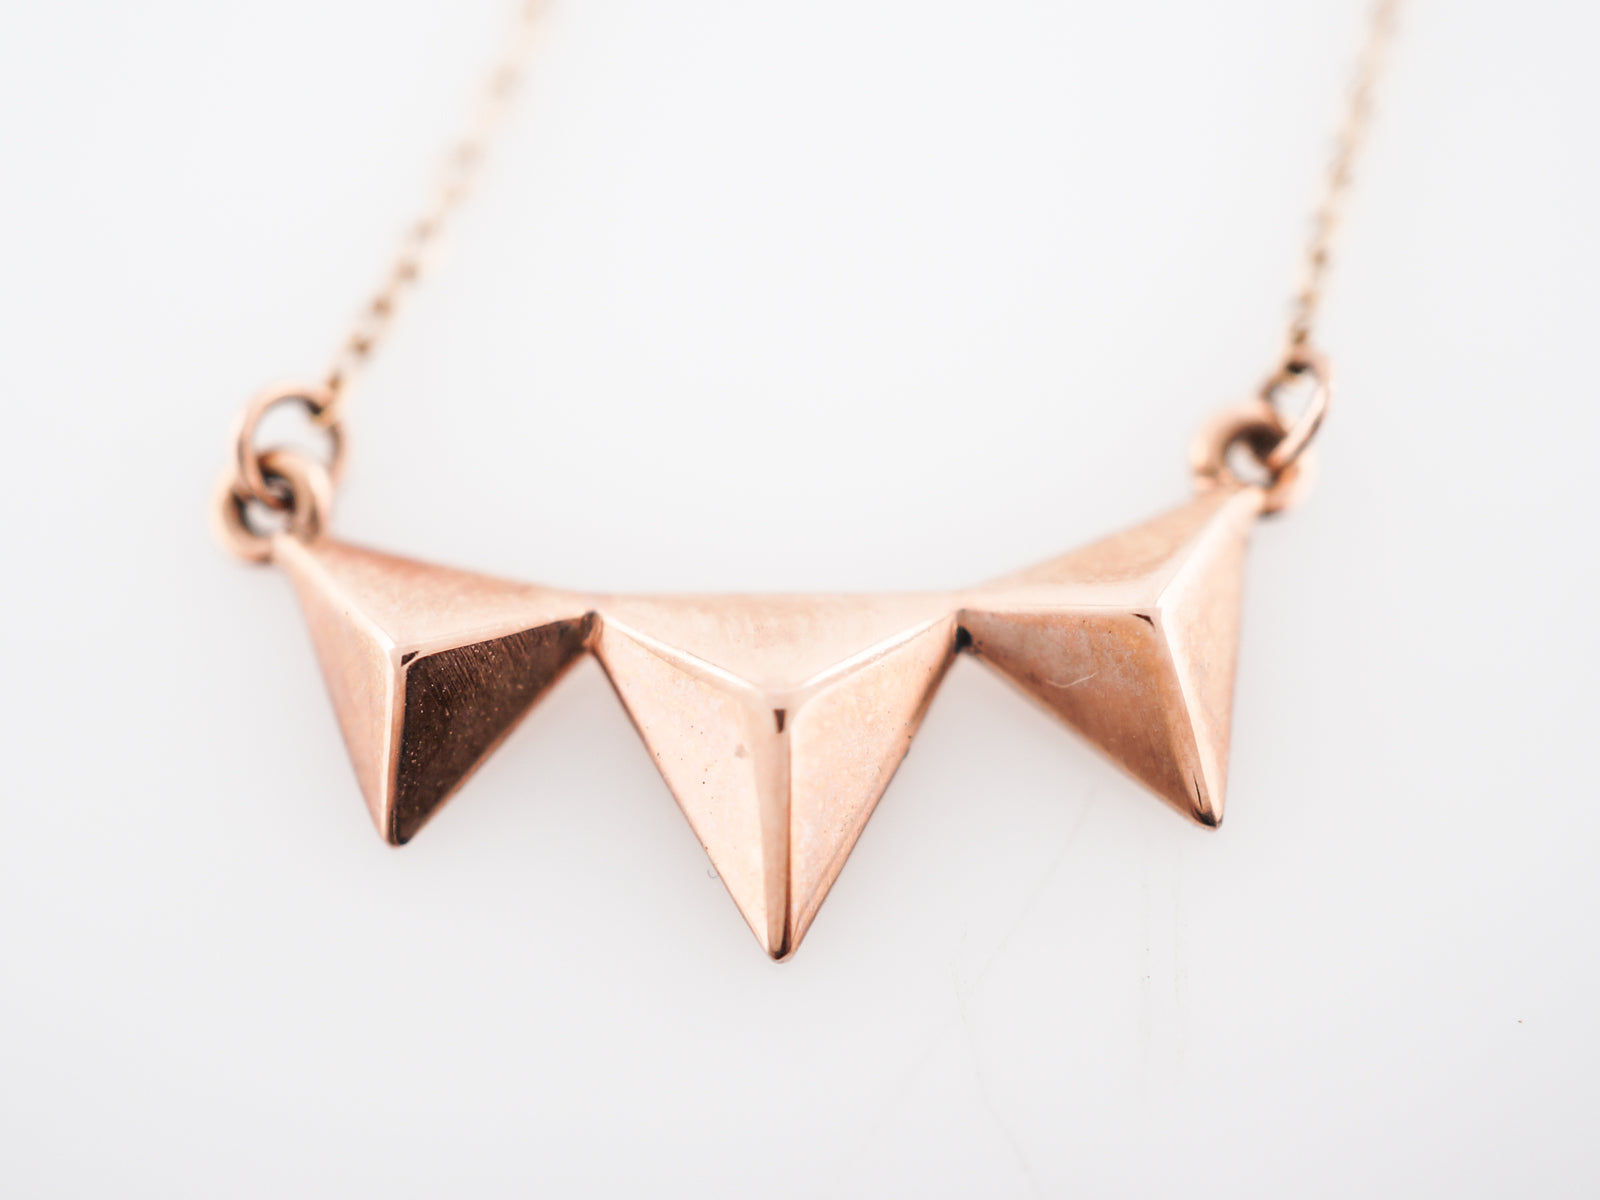 Modern Triangle Necklace in 14k Rose Gold